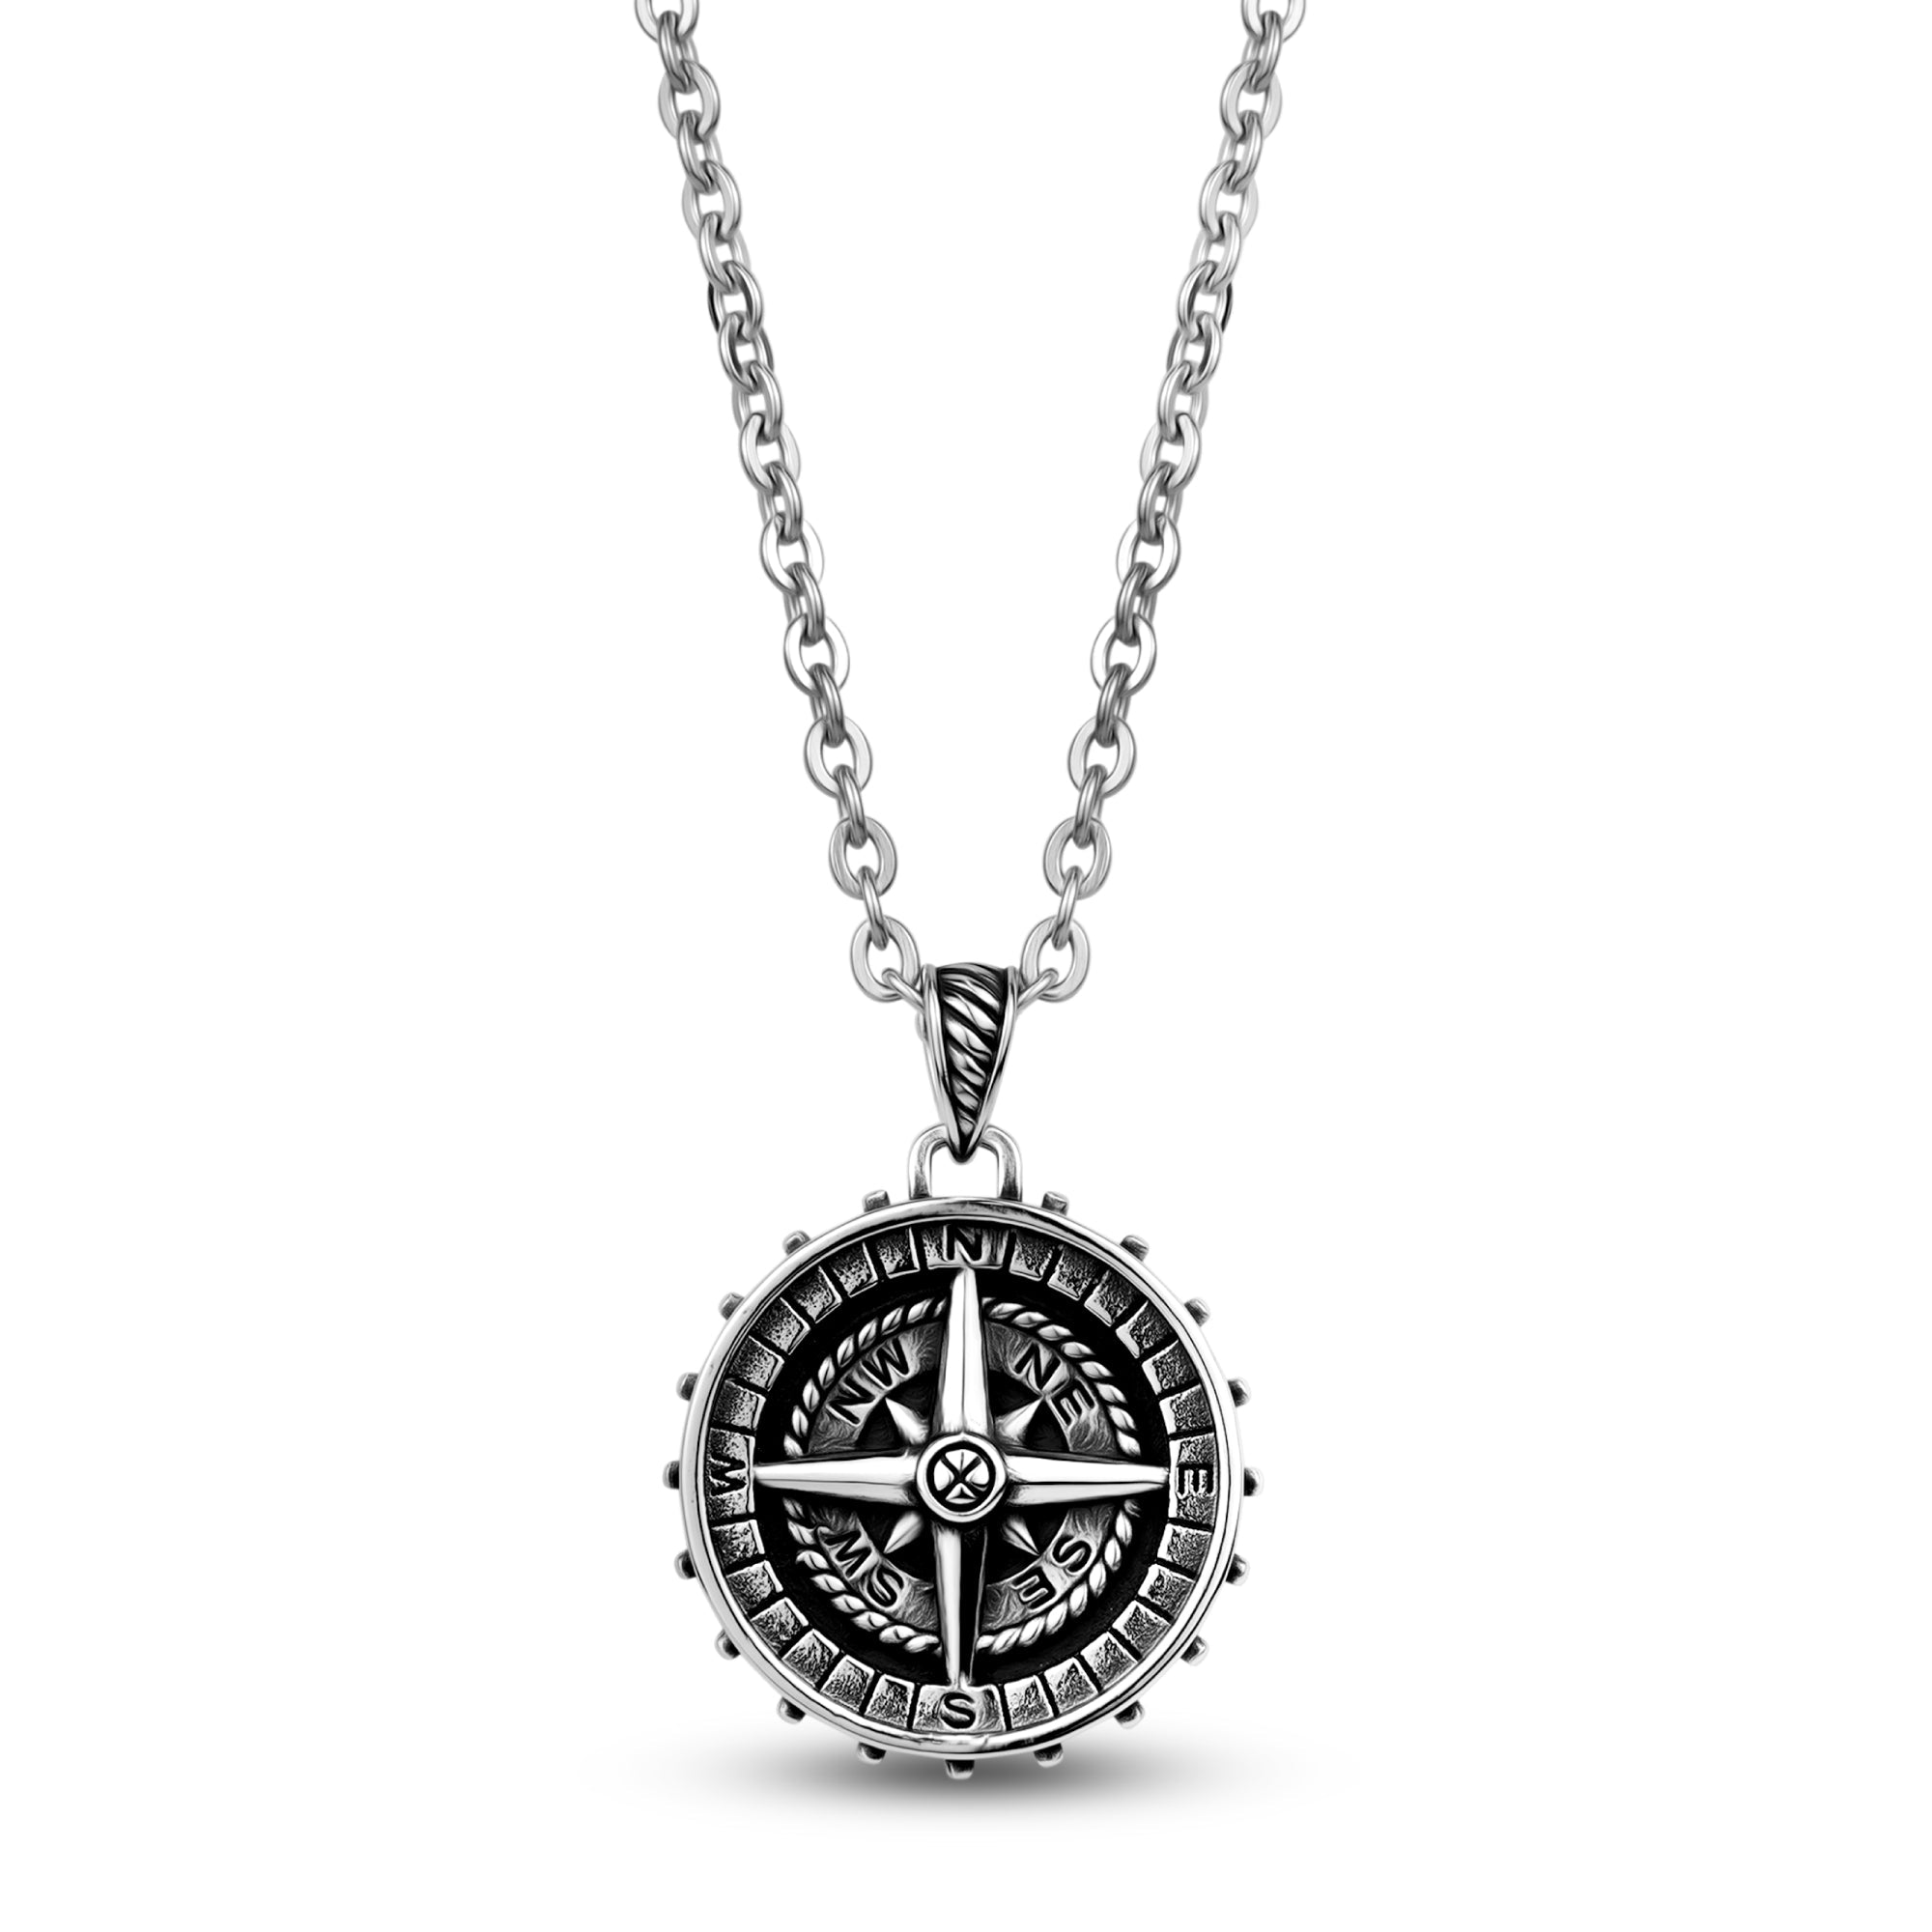 THE MEN THING NAVIGATOR - Alloy Compass Pendant with Pure Stainless Steel  24inch Round Box Chain, American trending Style for Men & Boy : Amazon.in:  Jewellery